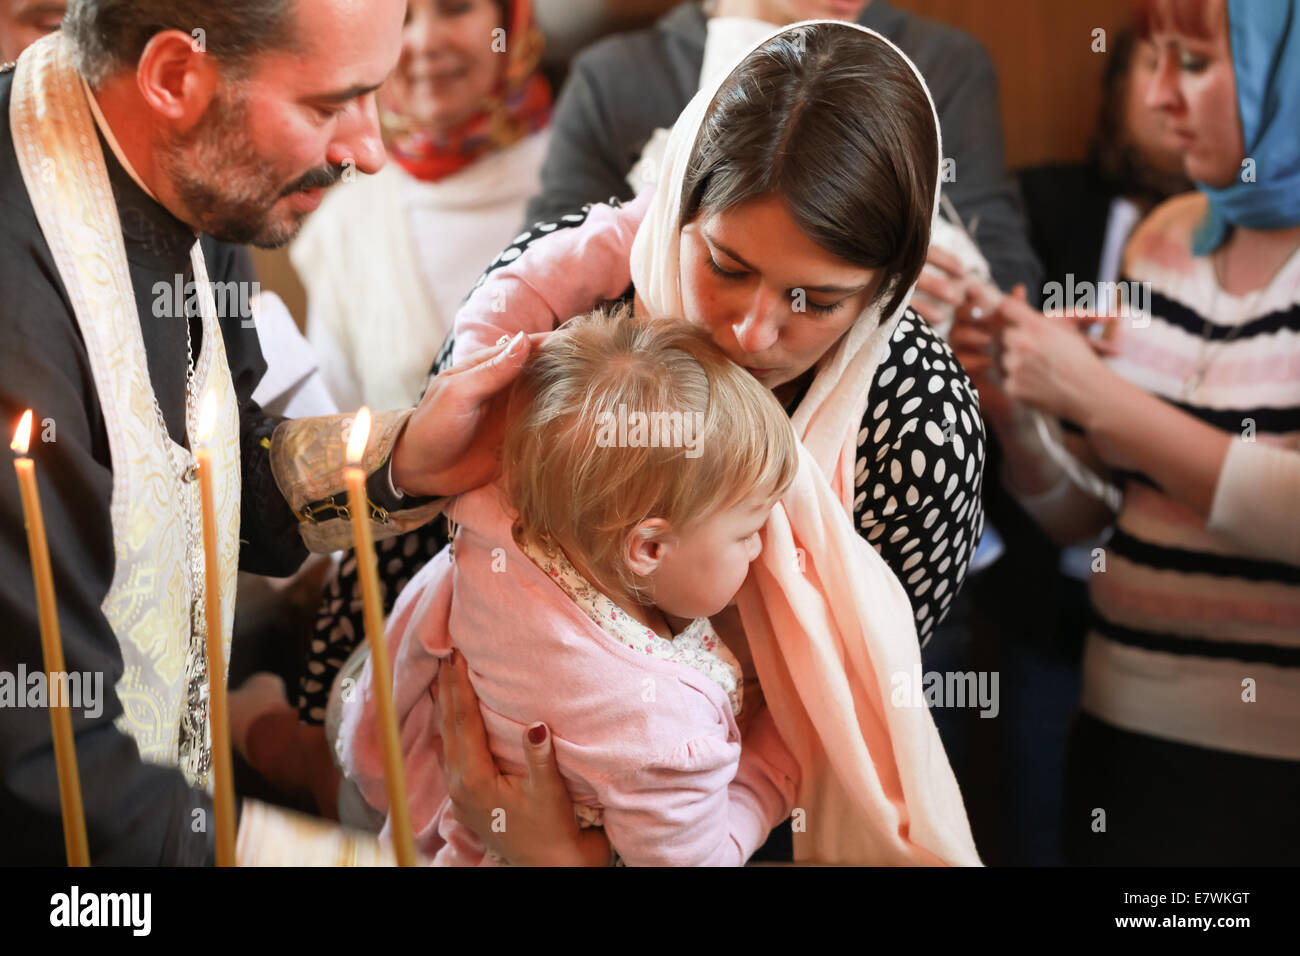 ST.PETERSBURG, RUSSIA - SEPTEMBER 21, 2014: Orthodox priest performs the rite of baptism for a little Russian girl Stock Photo